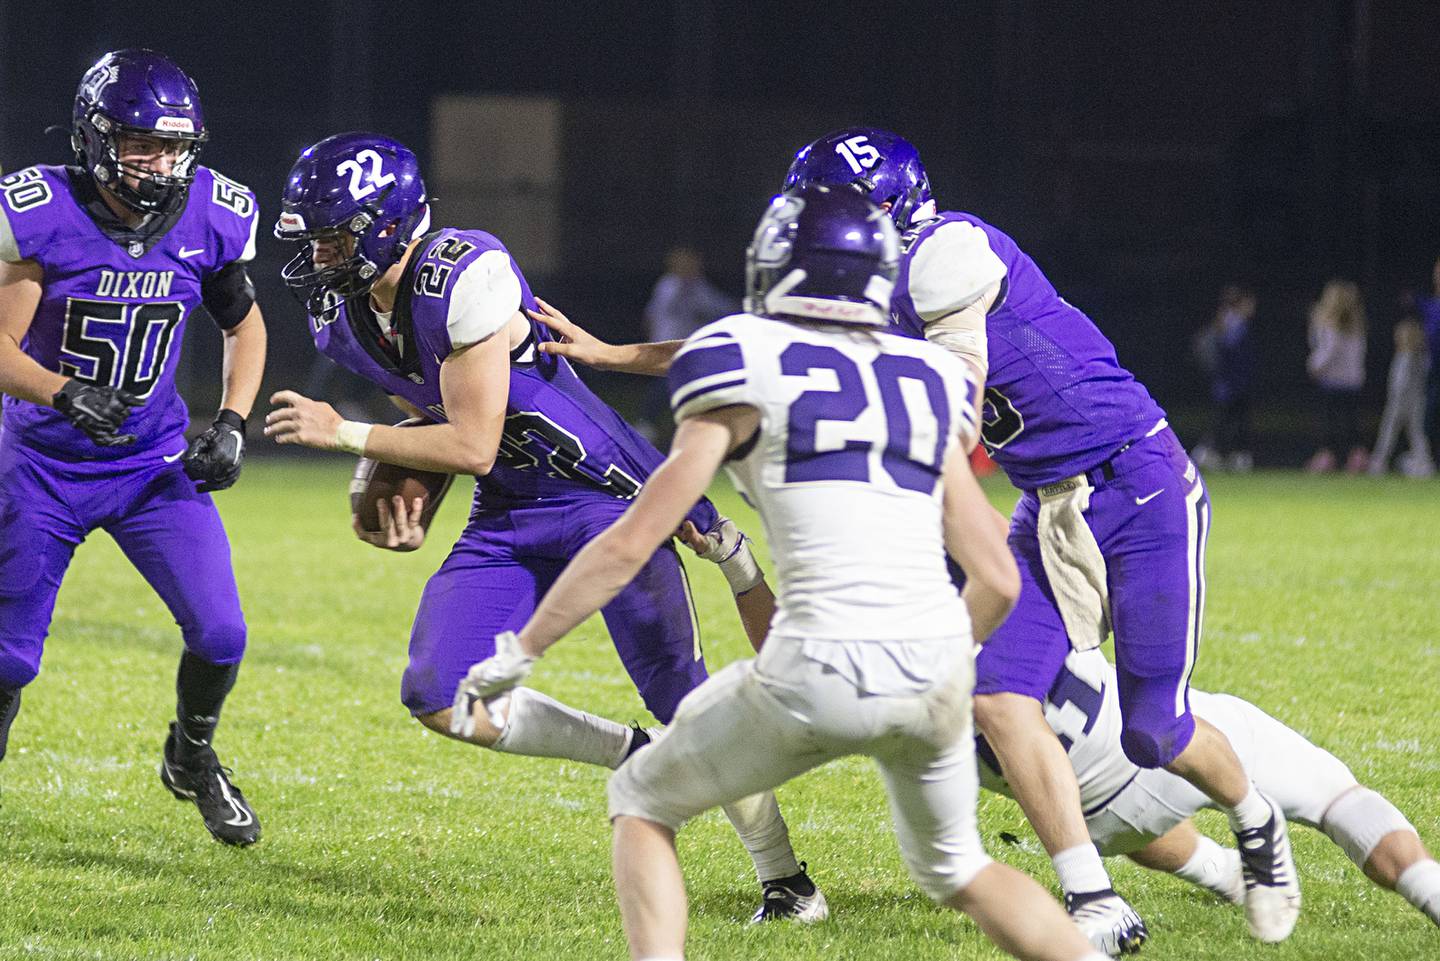 Dixon’s Aiden Wiseman fights for yards against Rockford Lutheran Friday, Sept. 30, 2022.